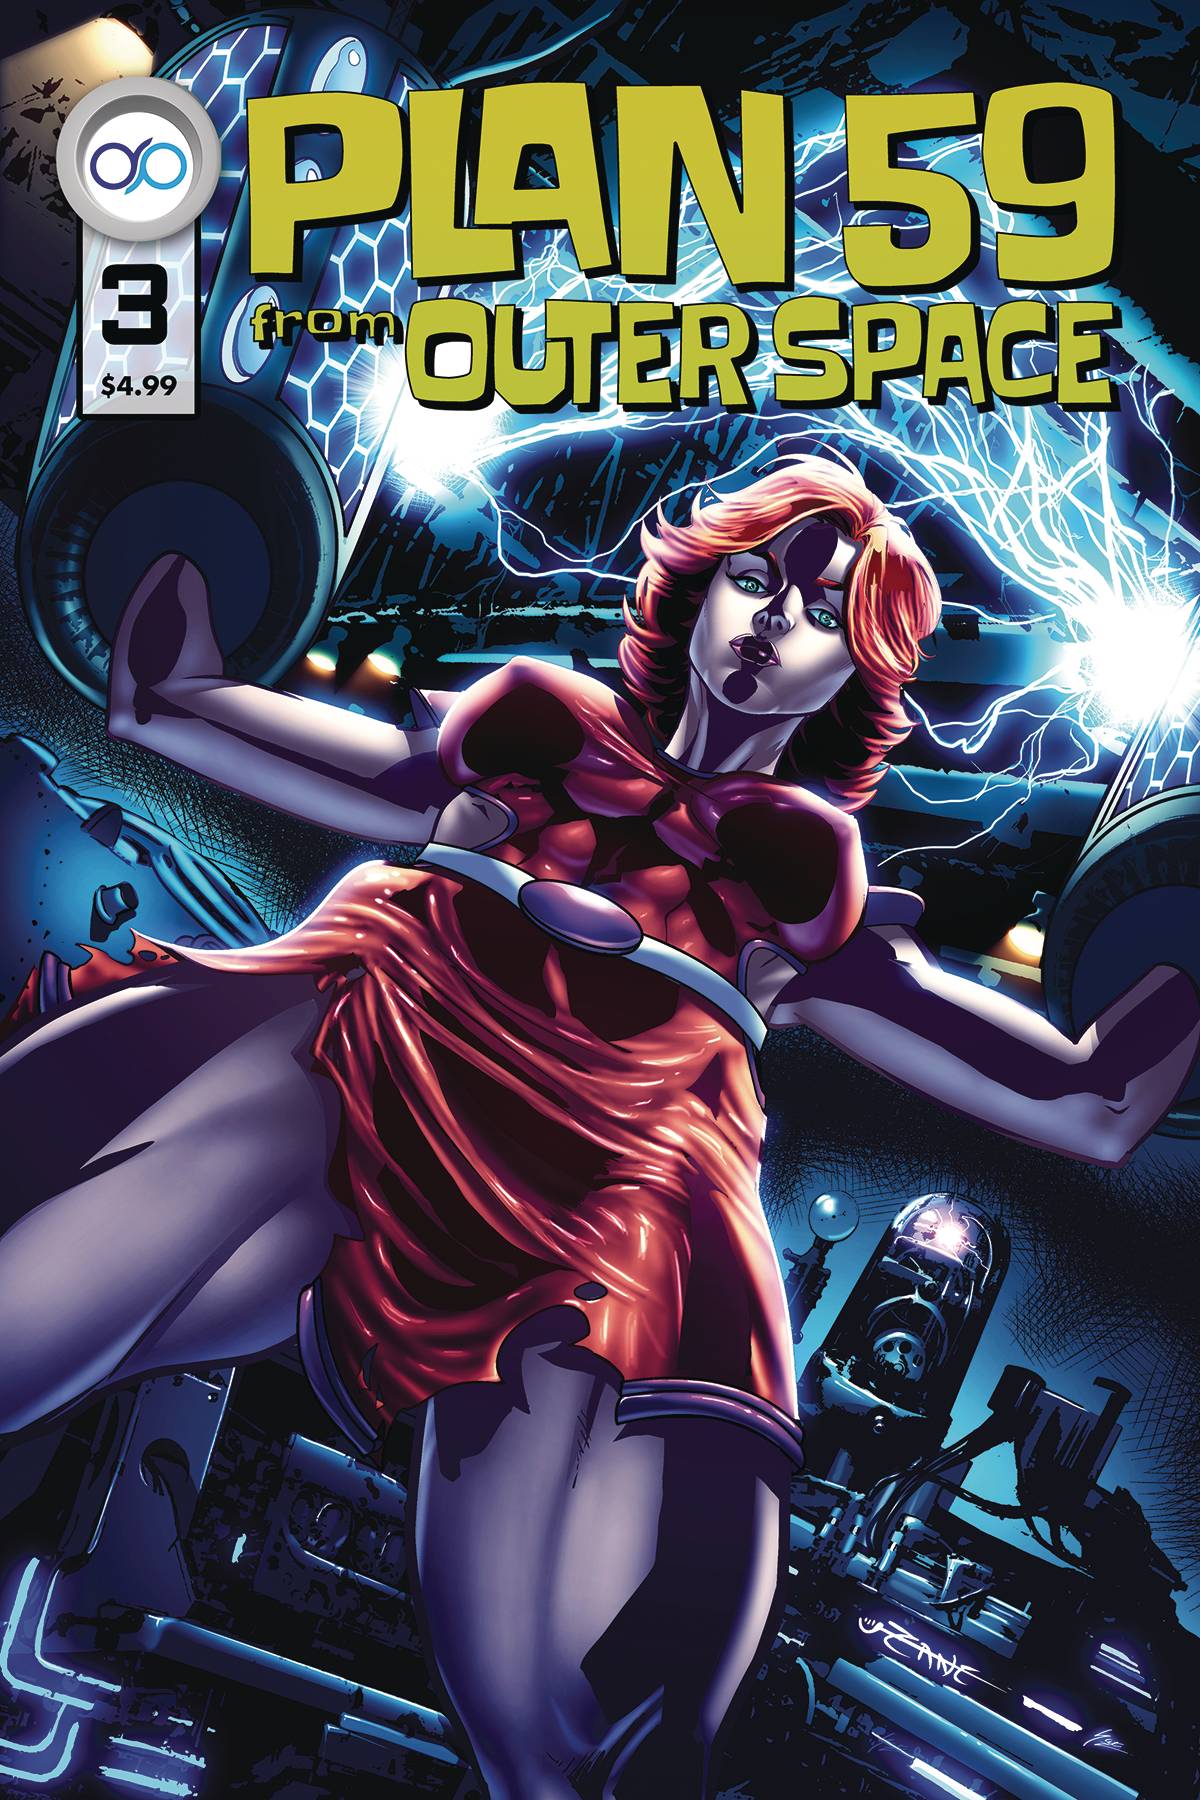 PLAN 59 FROM OUTER SPACE #3 (OF 3) (MR)